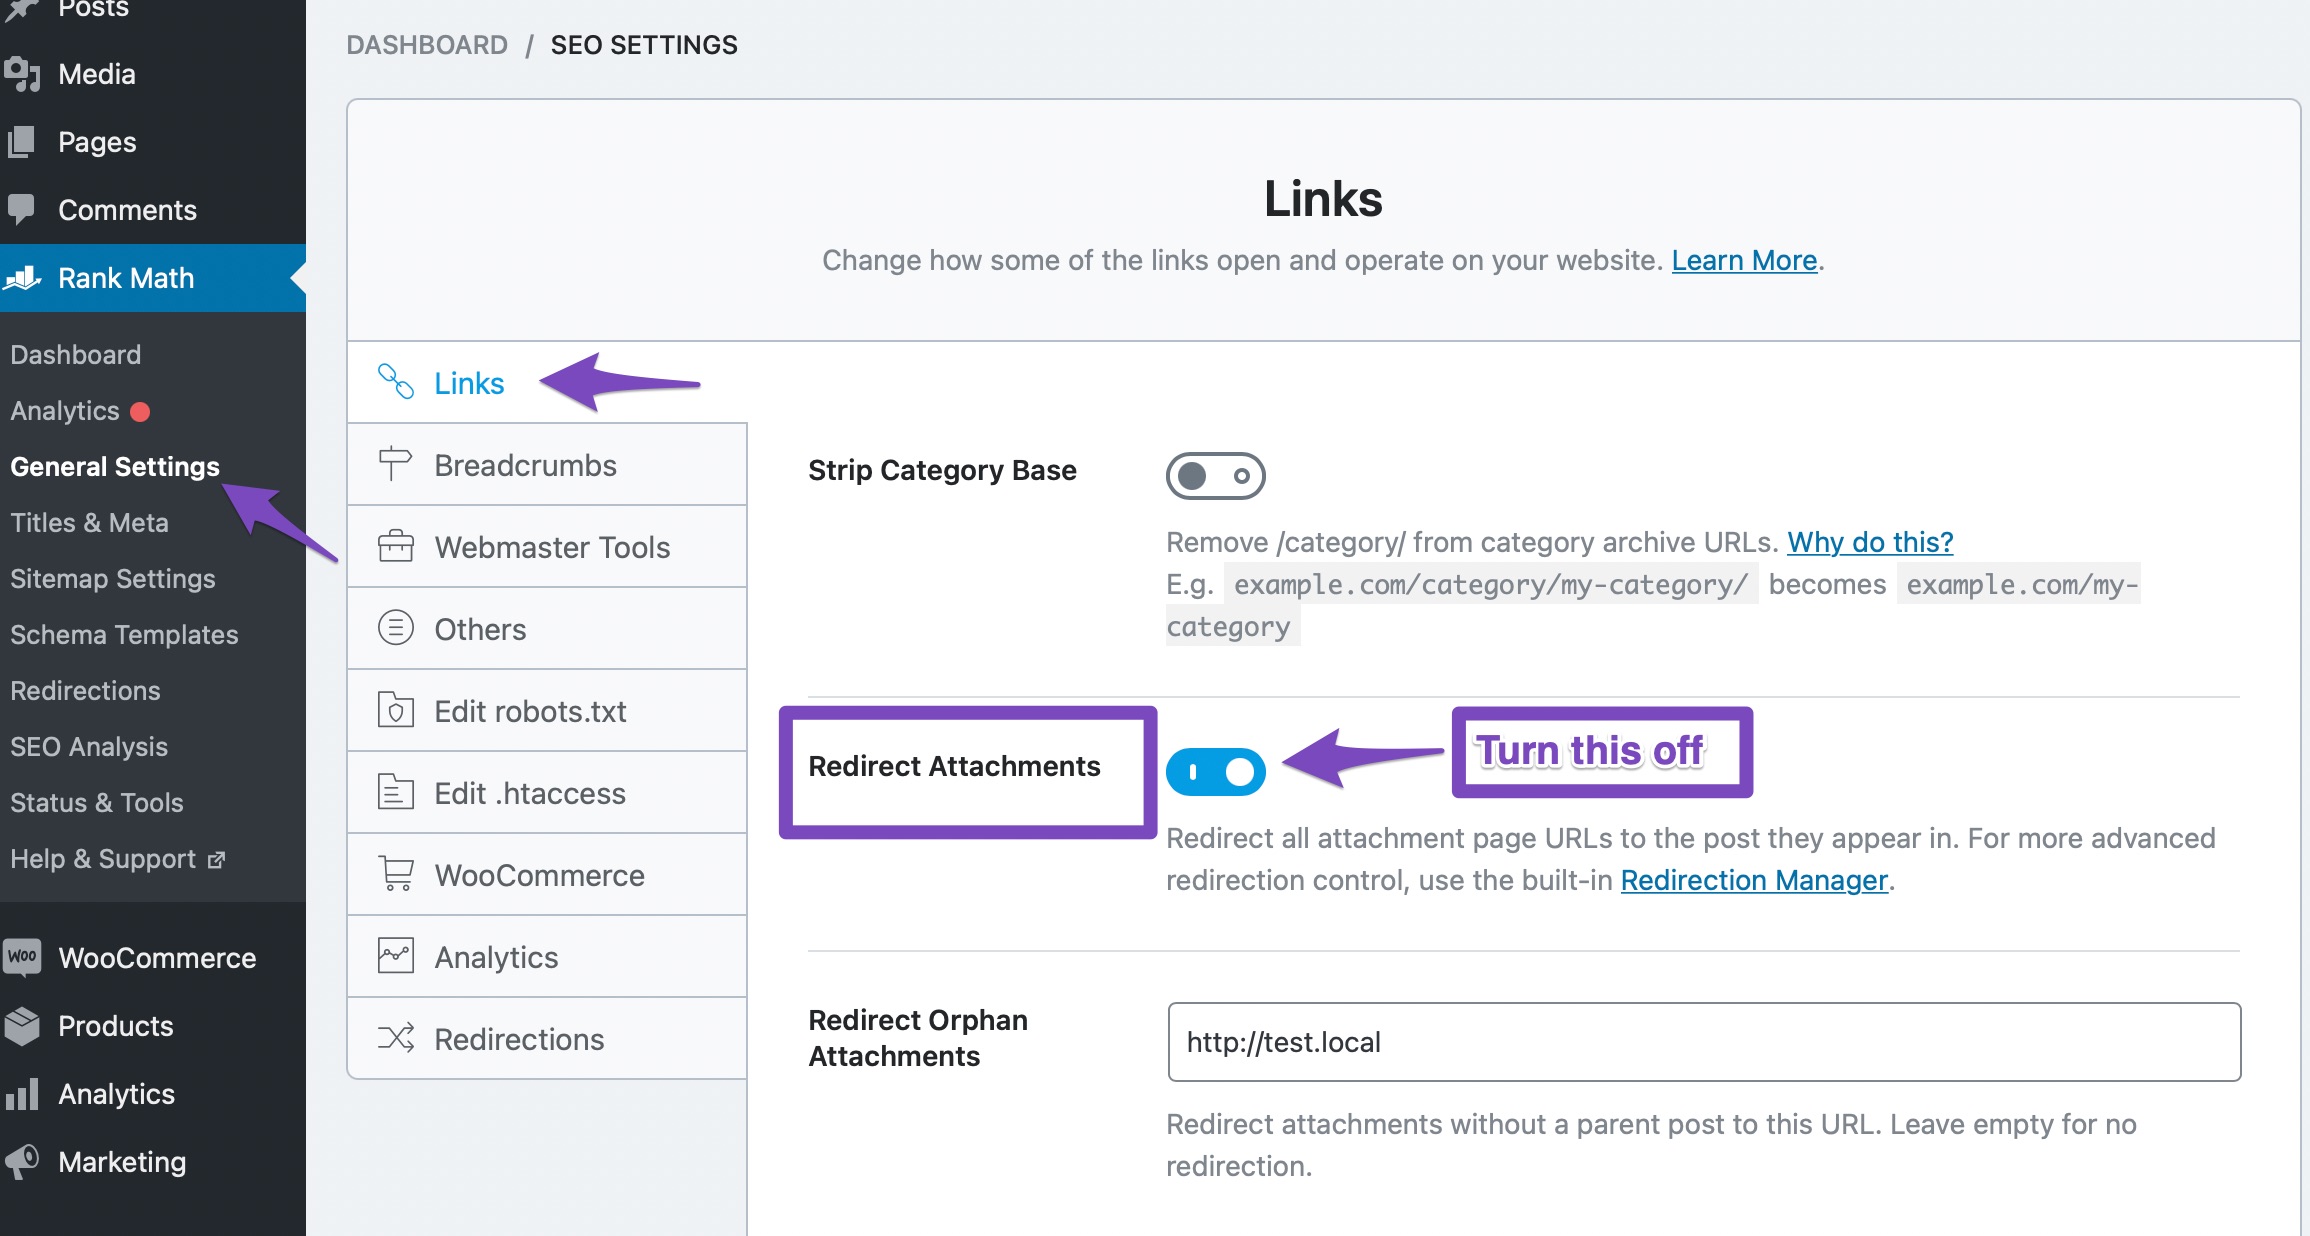 turn setting off to enable media sitemaps